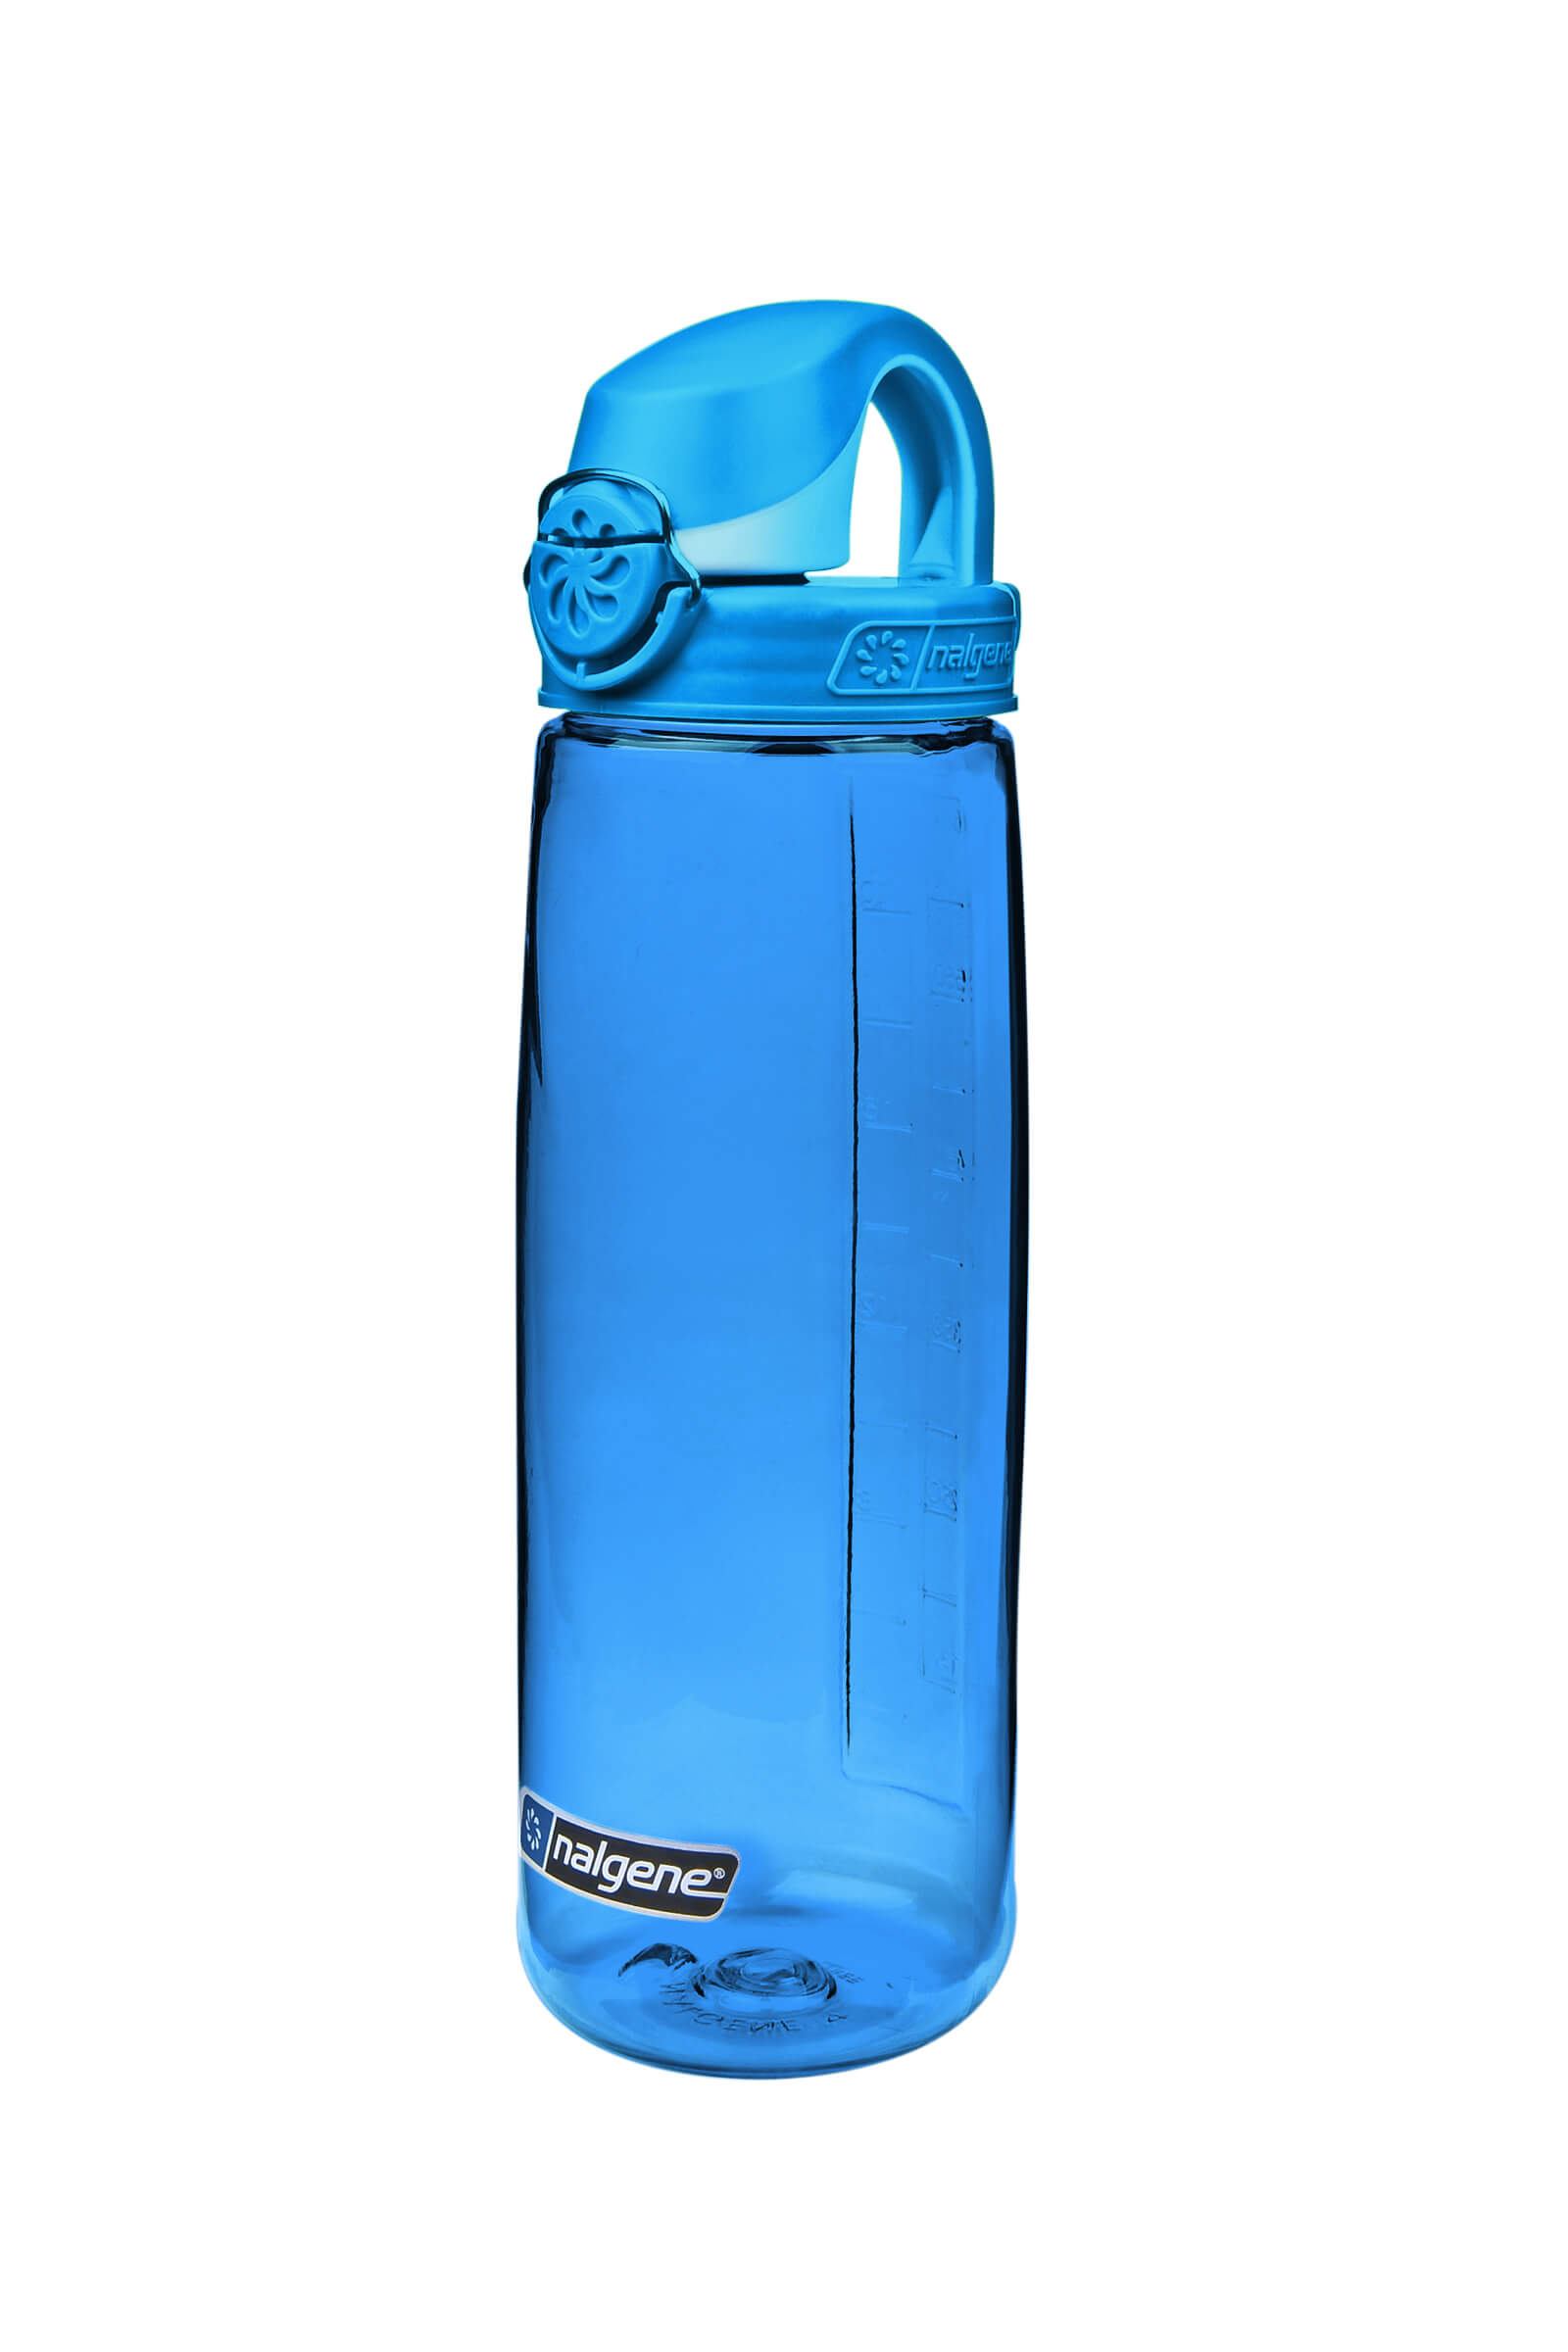 Nalgene On The Fly 24 oz Water Bottle Replacement Lid